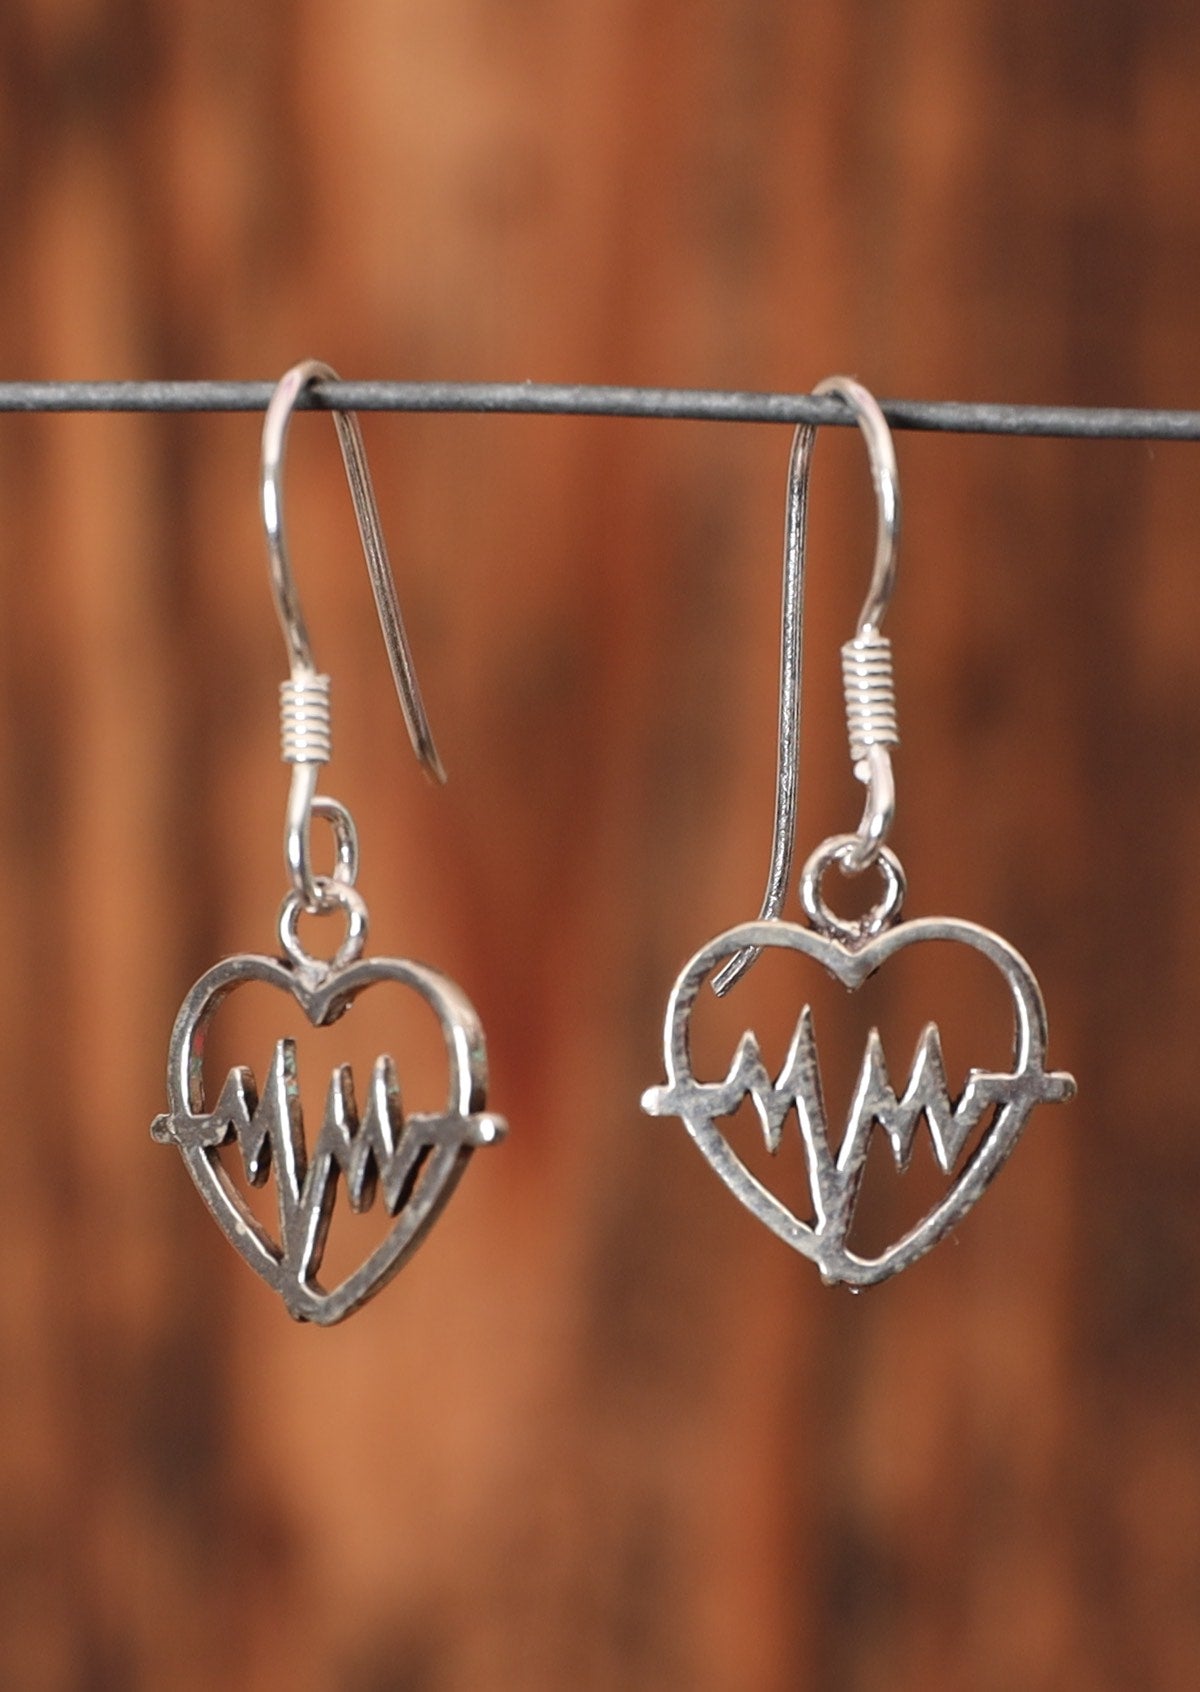 92.5% silver heartbeat earrings with hook sit on wire for display.